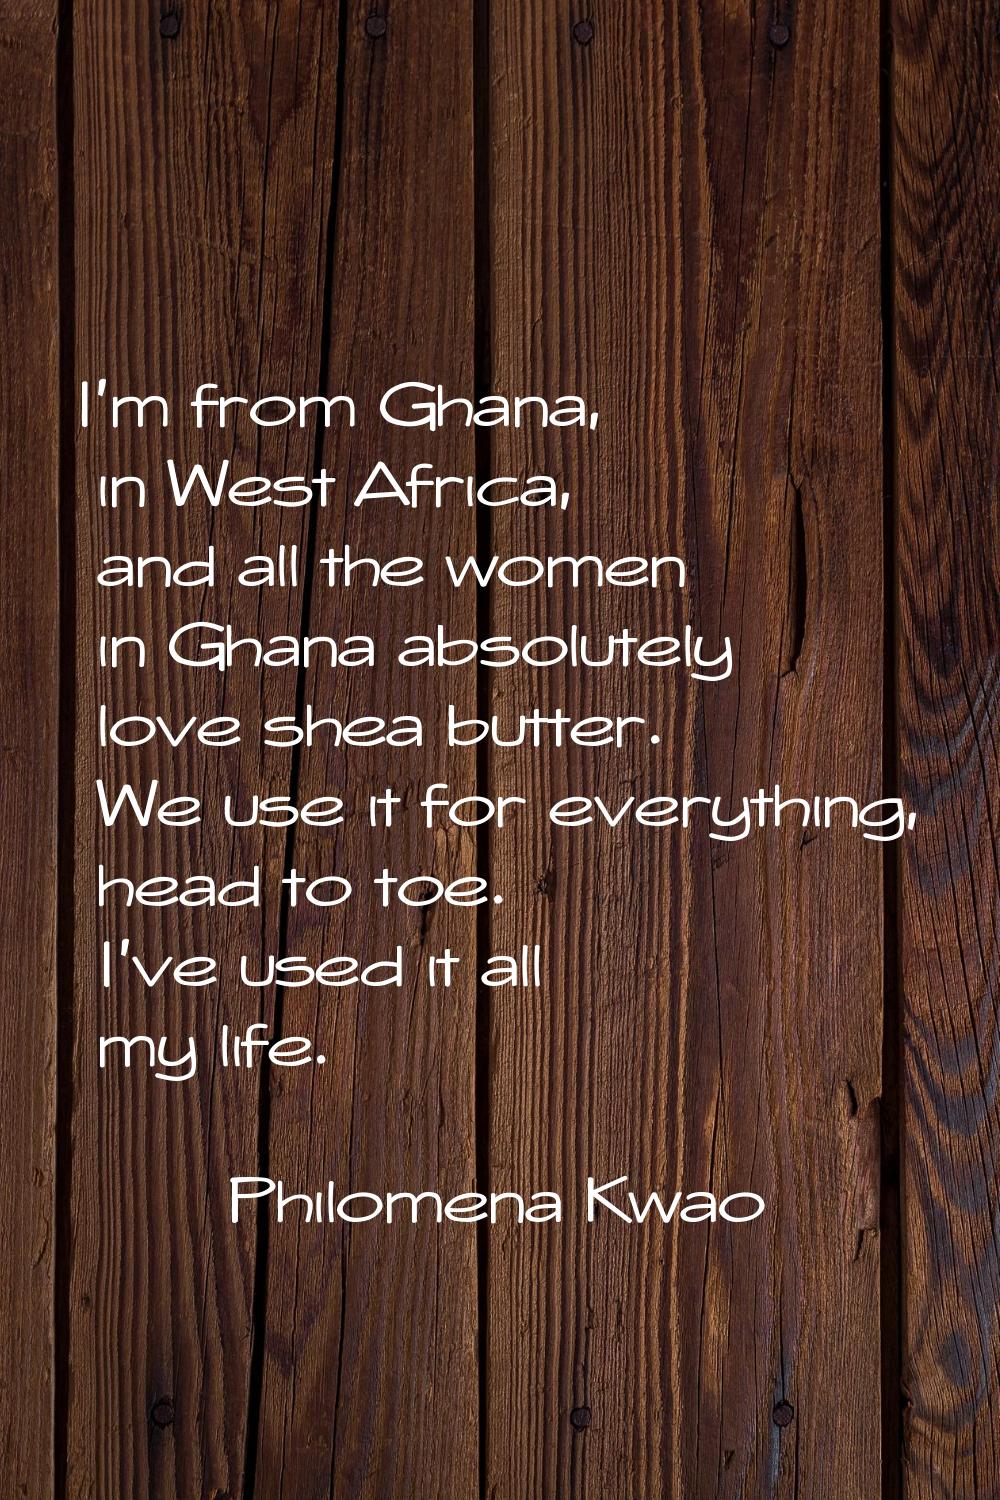 I'm from Ghana, in West Africa, and all the women in Ghana absolutely love shea butter. We use it f